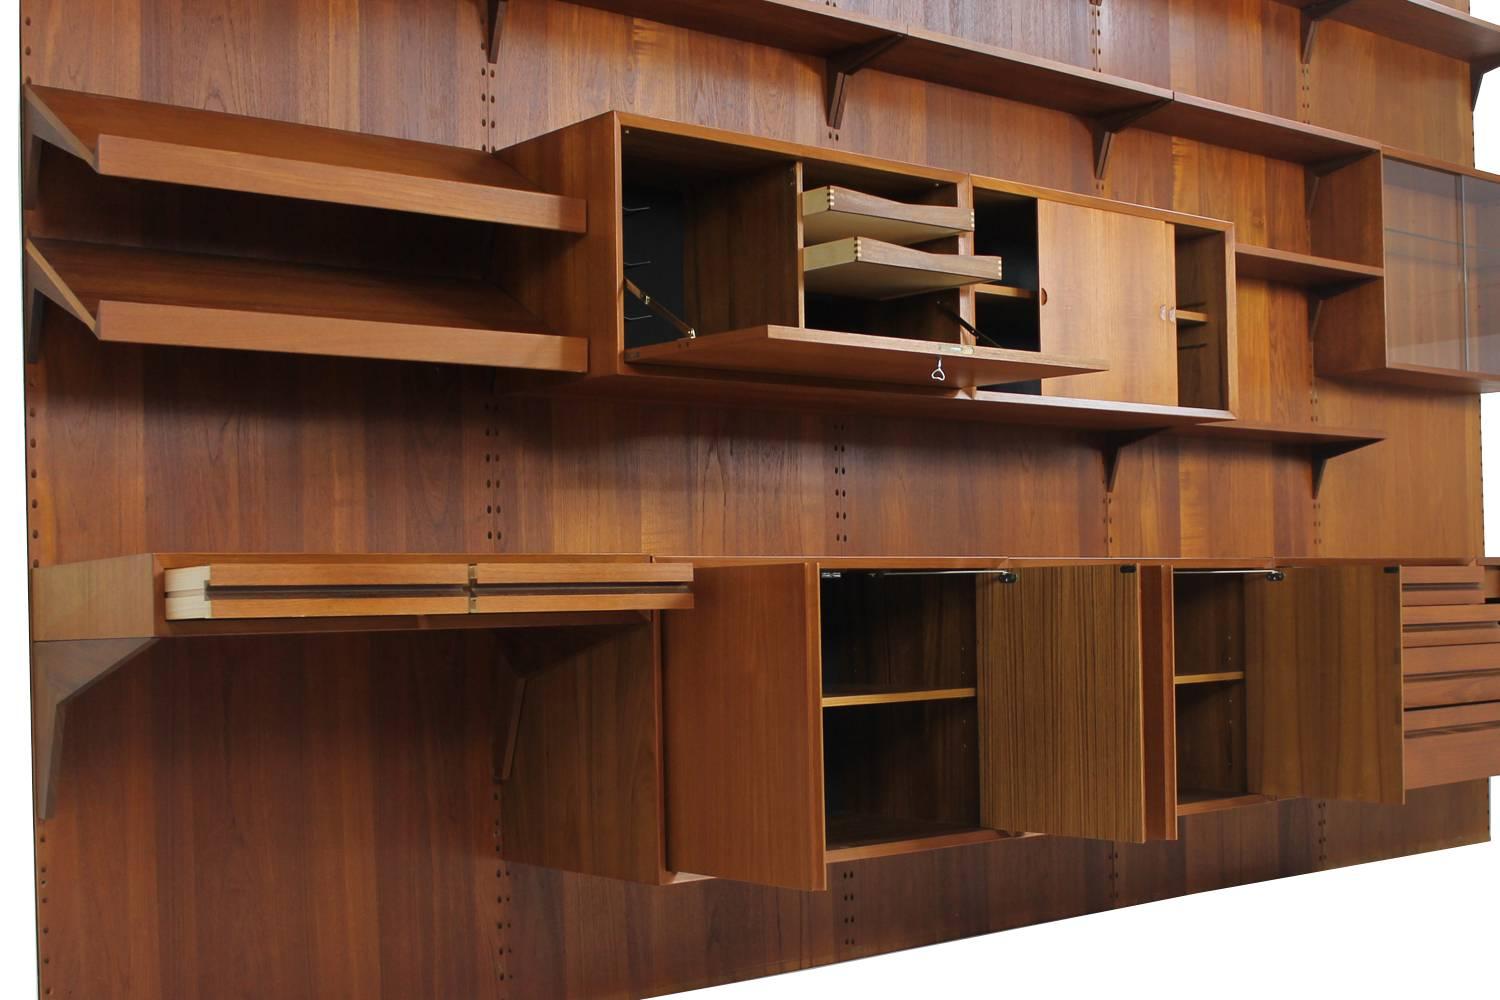 Beautiful and large Royal Teak wall unit designed by Poul Cadovius and manufactured by Cado, circa 1960 in Denmark. This modular system can be assembled as desired and features large cabinets with plenty of storage space. Dimensions of the